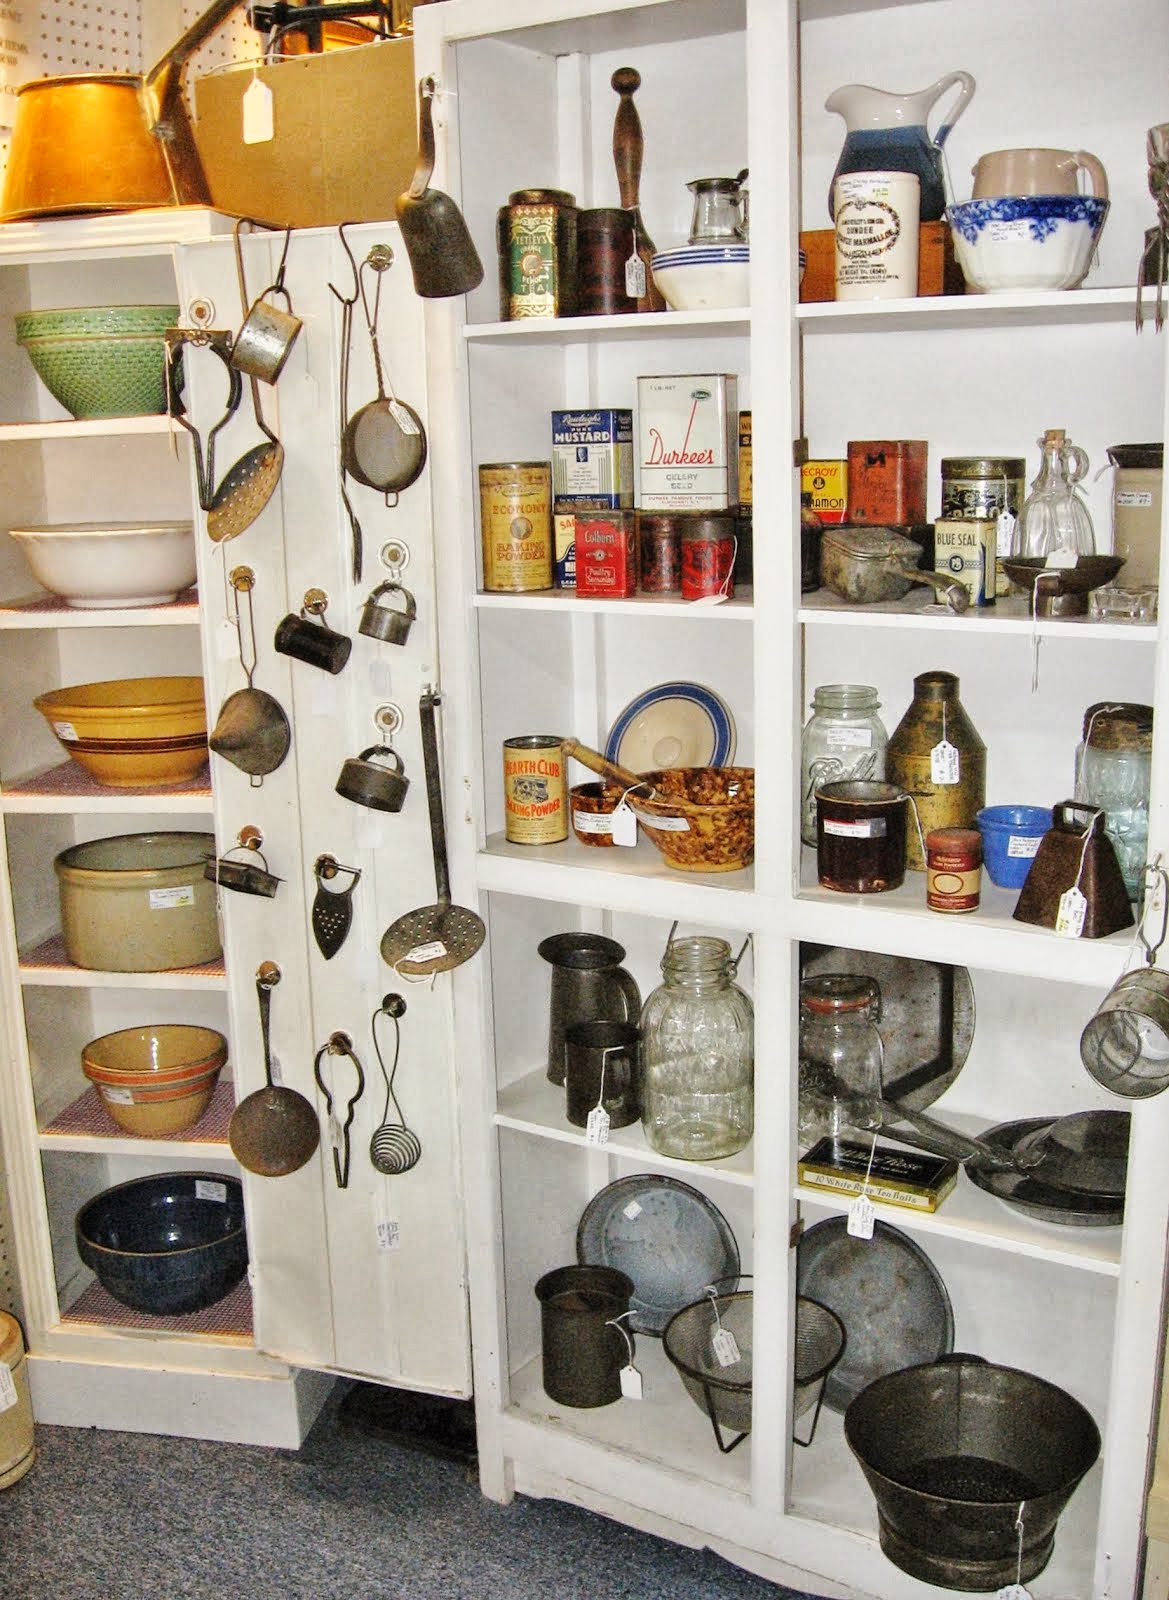 Kitchenware Section....